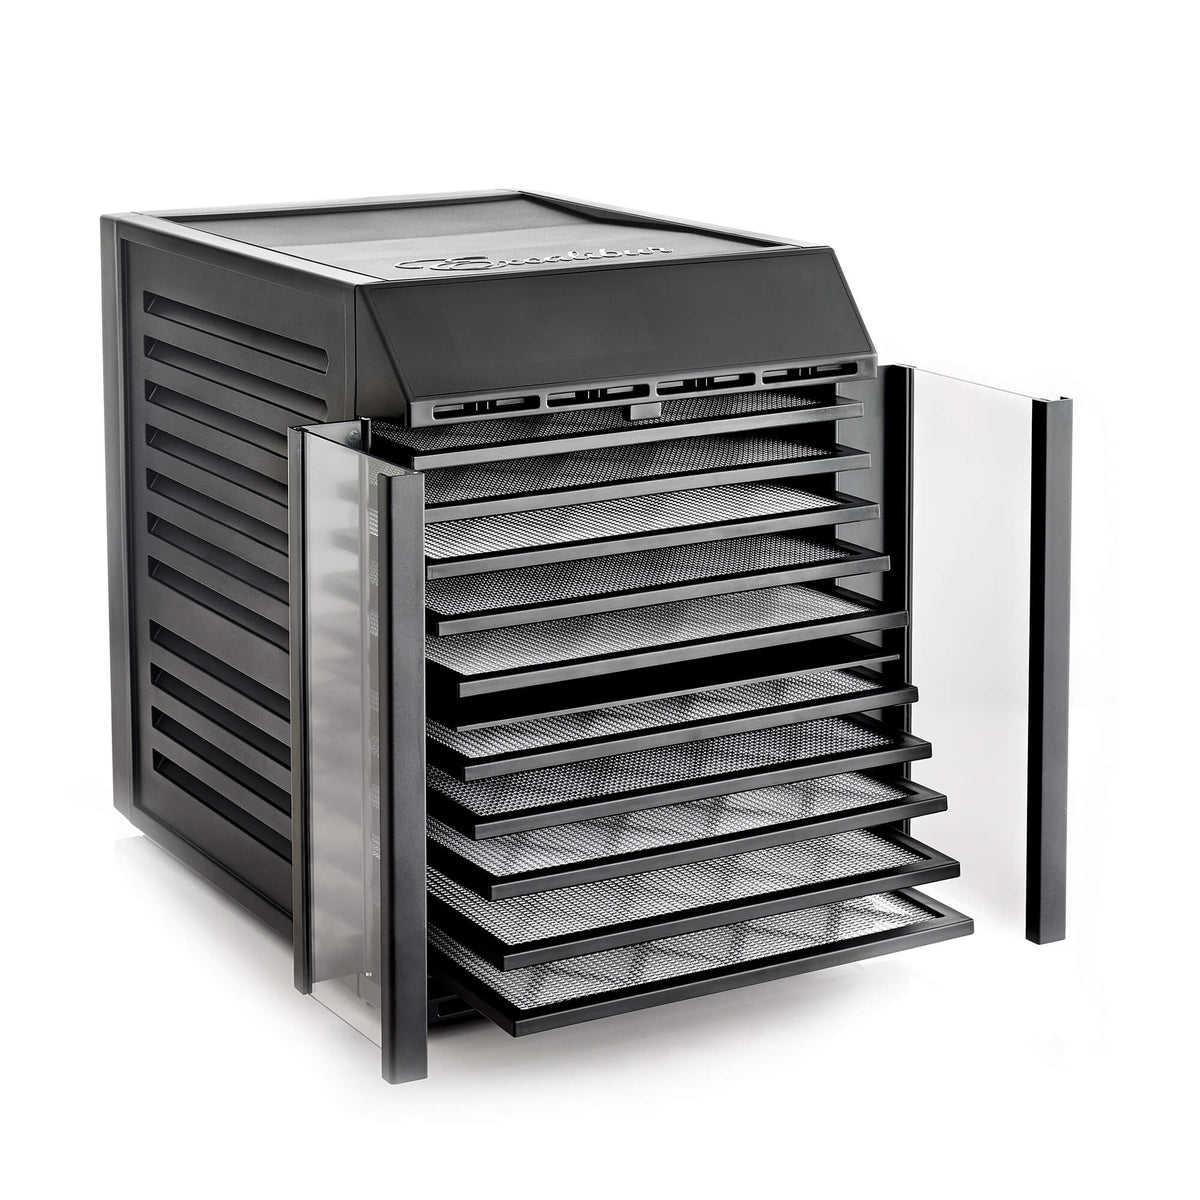 Excalibur RES10 10 tray compact digital dehydrator with clear hinged doors open and trays pulled out.